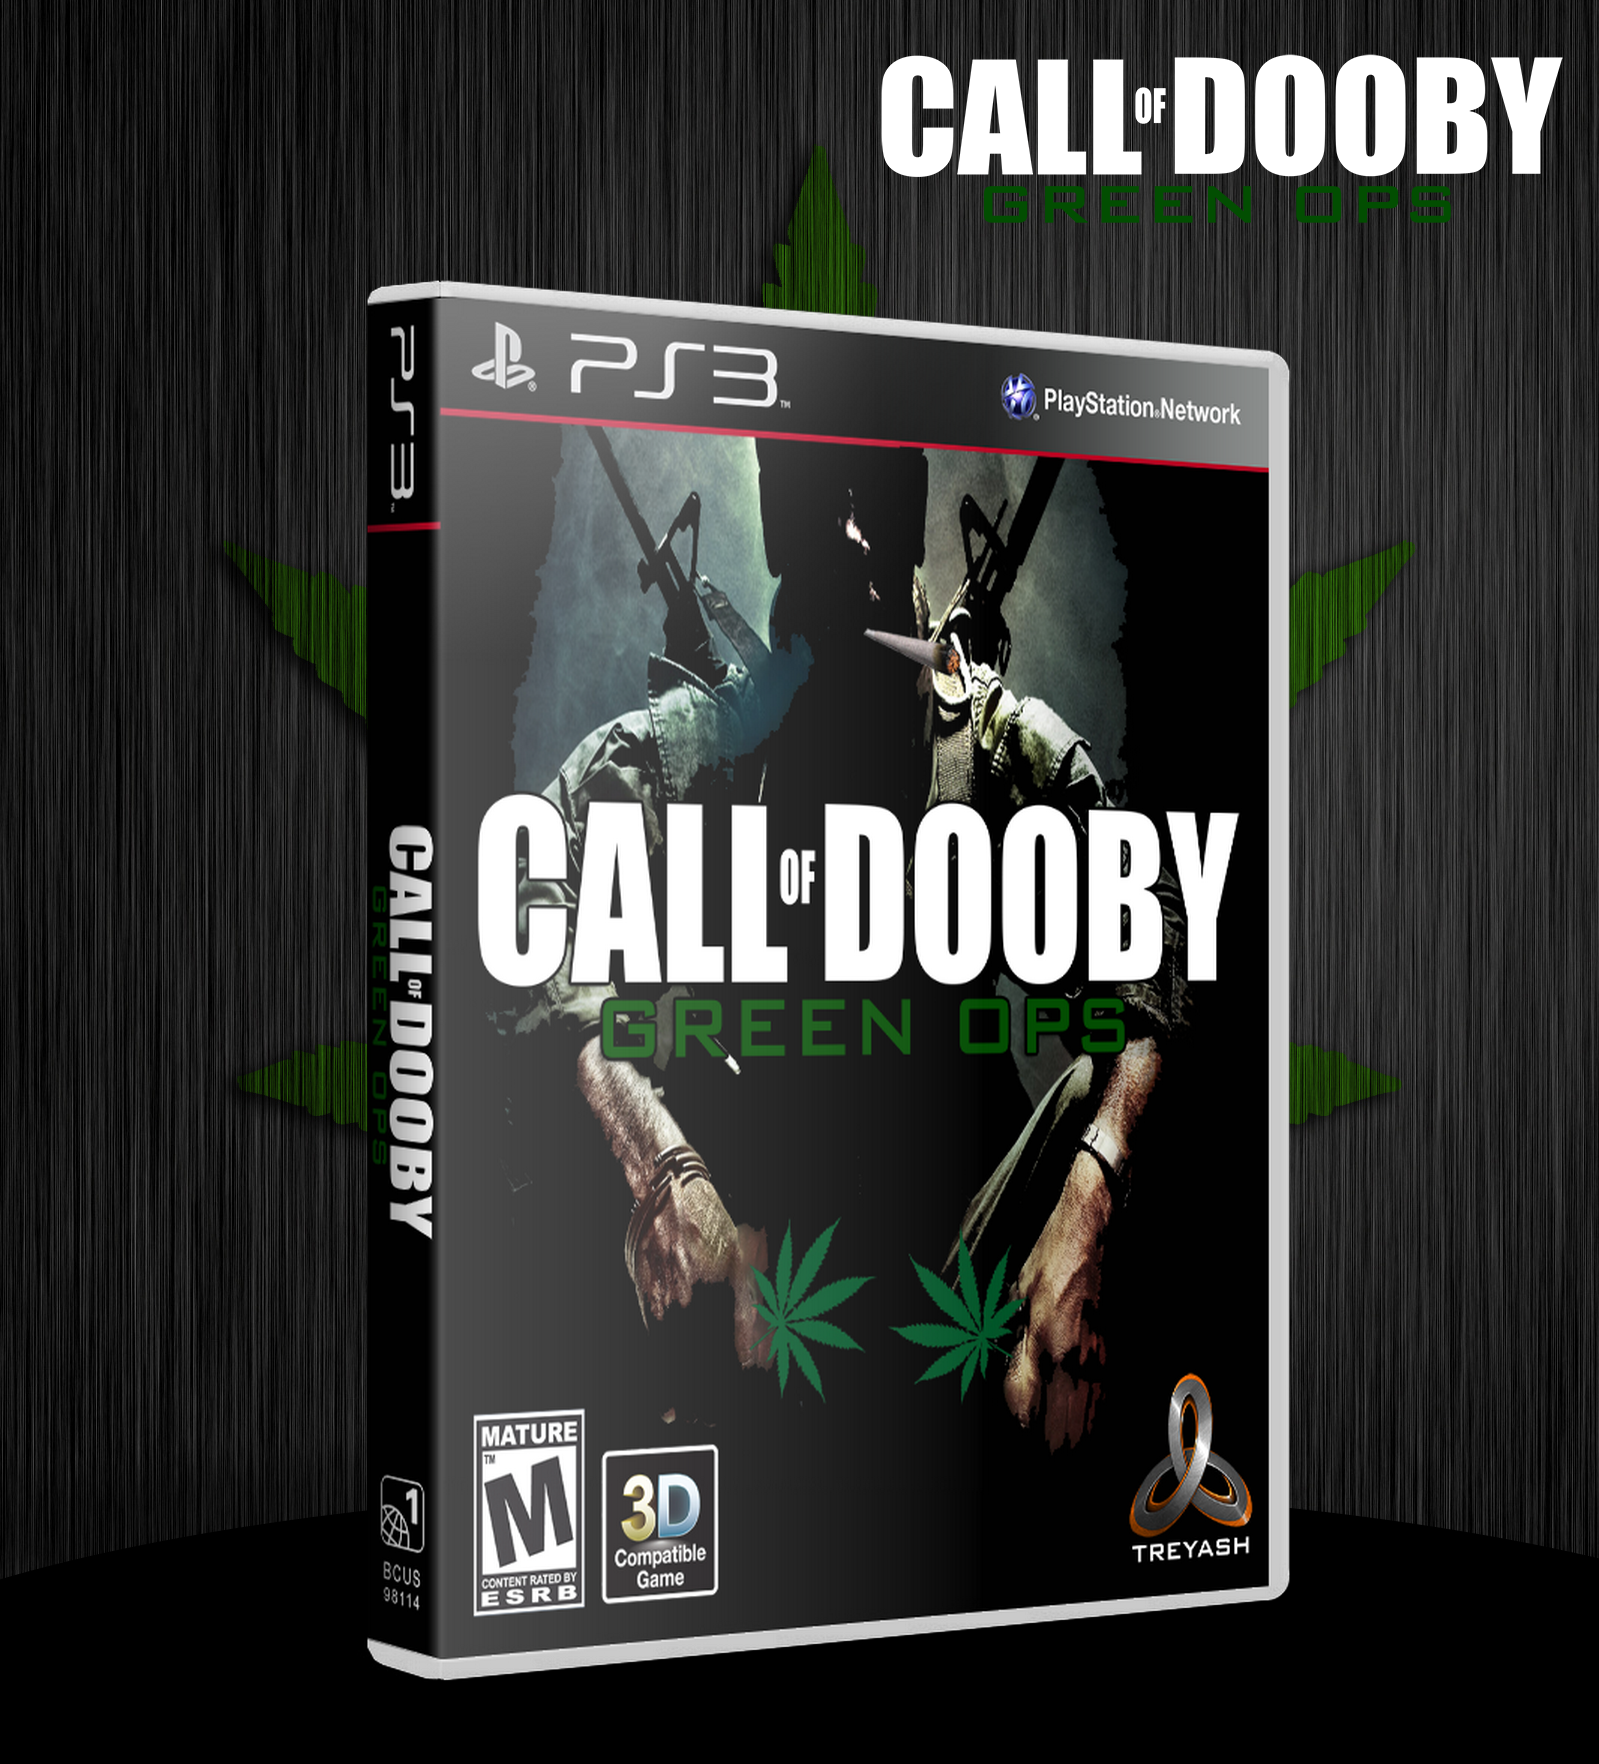 Call of Dooby: Green Ops box cover